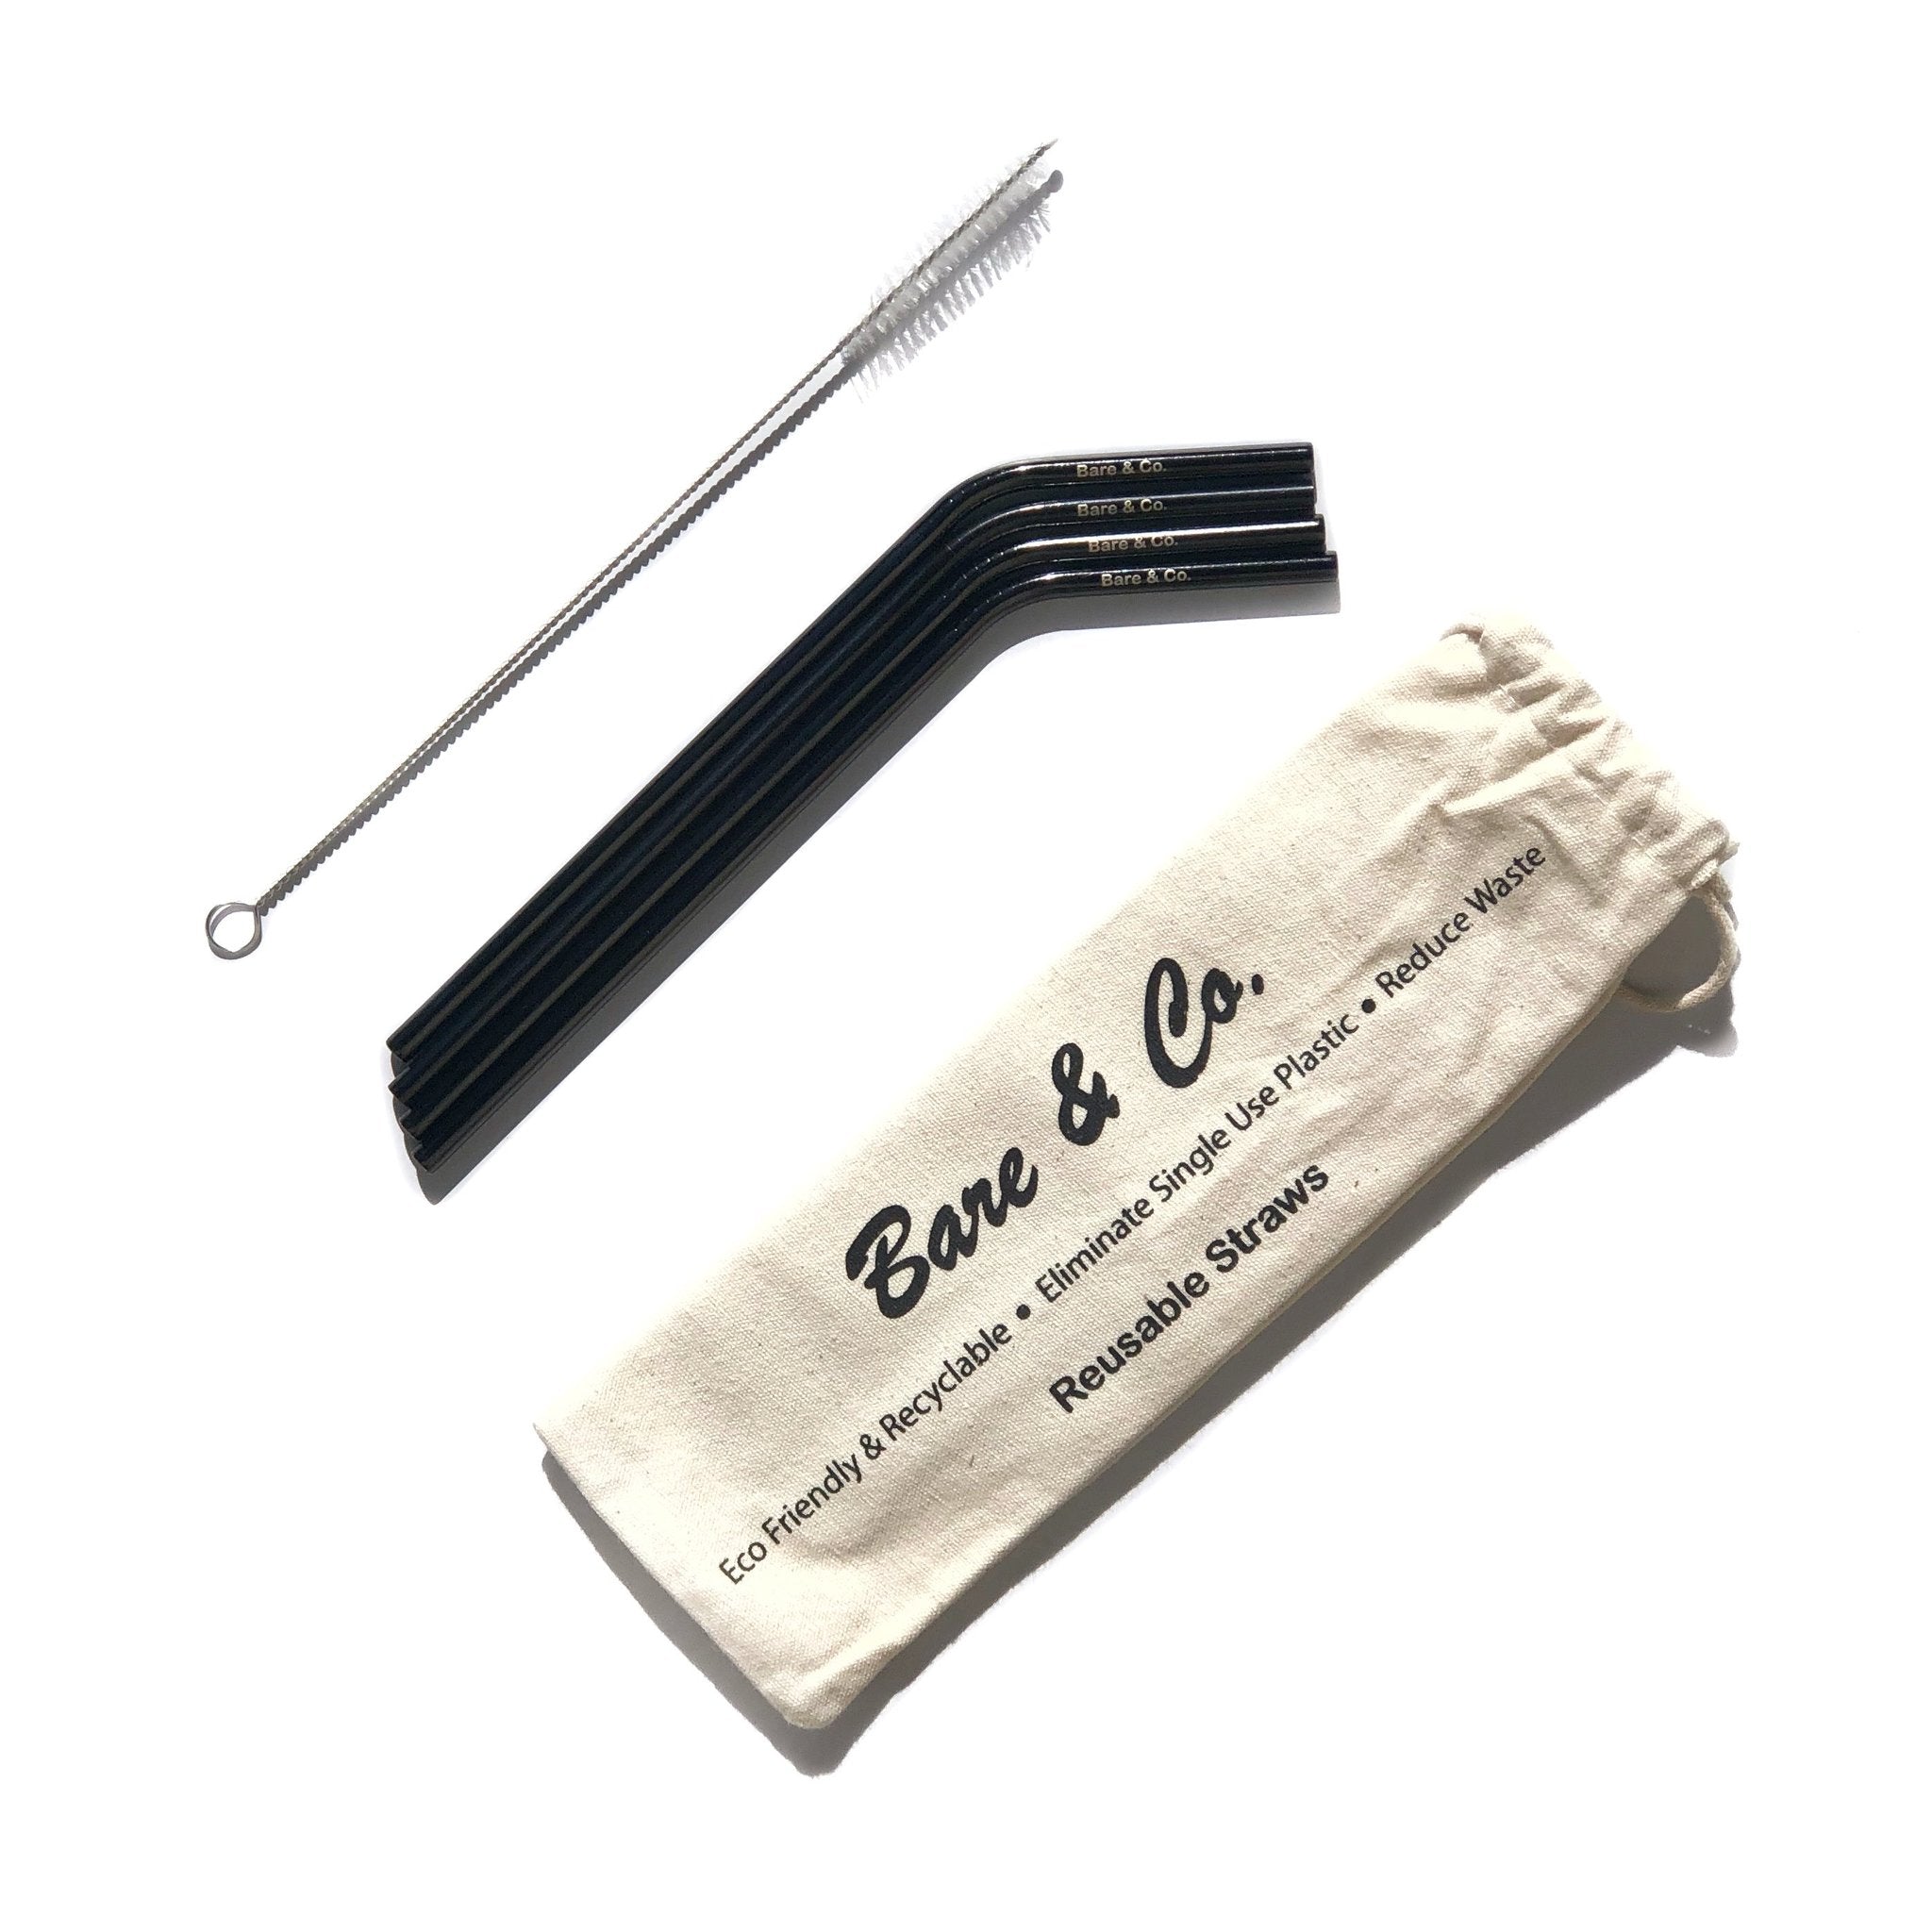 Whole Store Bare & Co. Reusable Stainless Steel Bent Straw 